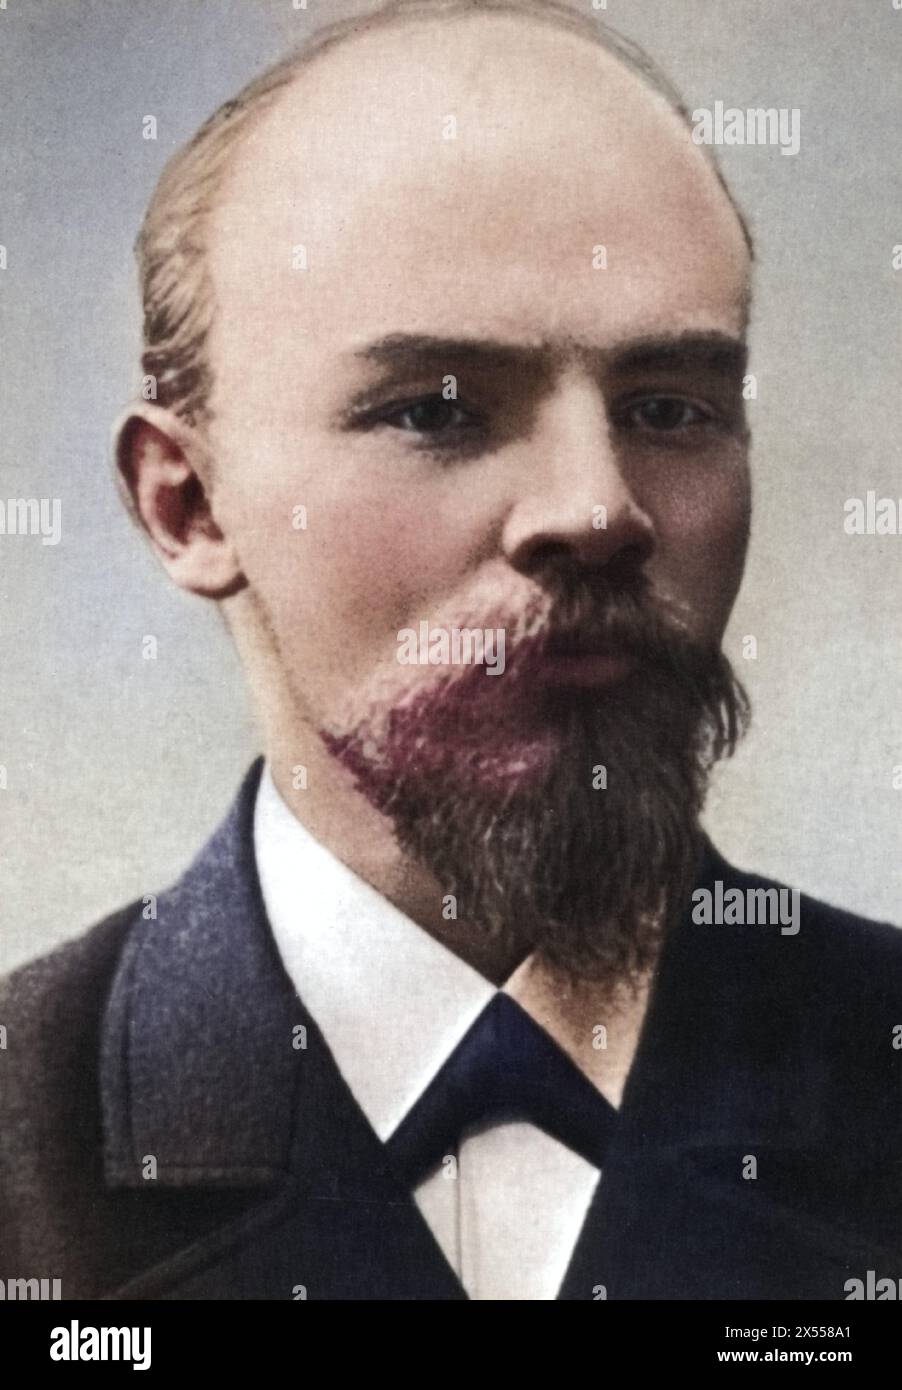 Lenin (Vladimir Ilyich Ulyanov), 22.4.1870 - 21.1.1924, Russian politician, portrait, February 1900, ADDITIONAL-RIGHTS-CLEARANCE-INFO-NOT-AVAILABLE Stock Photo